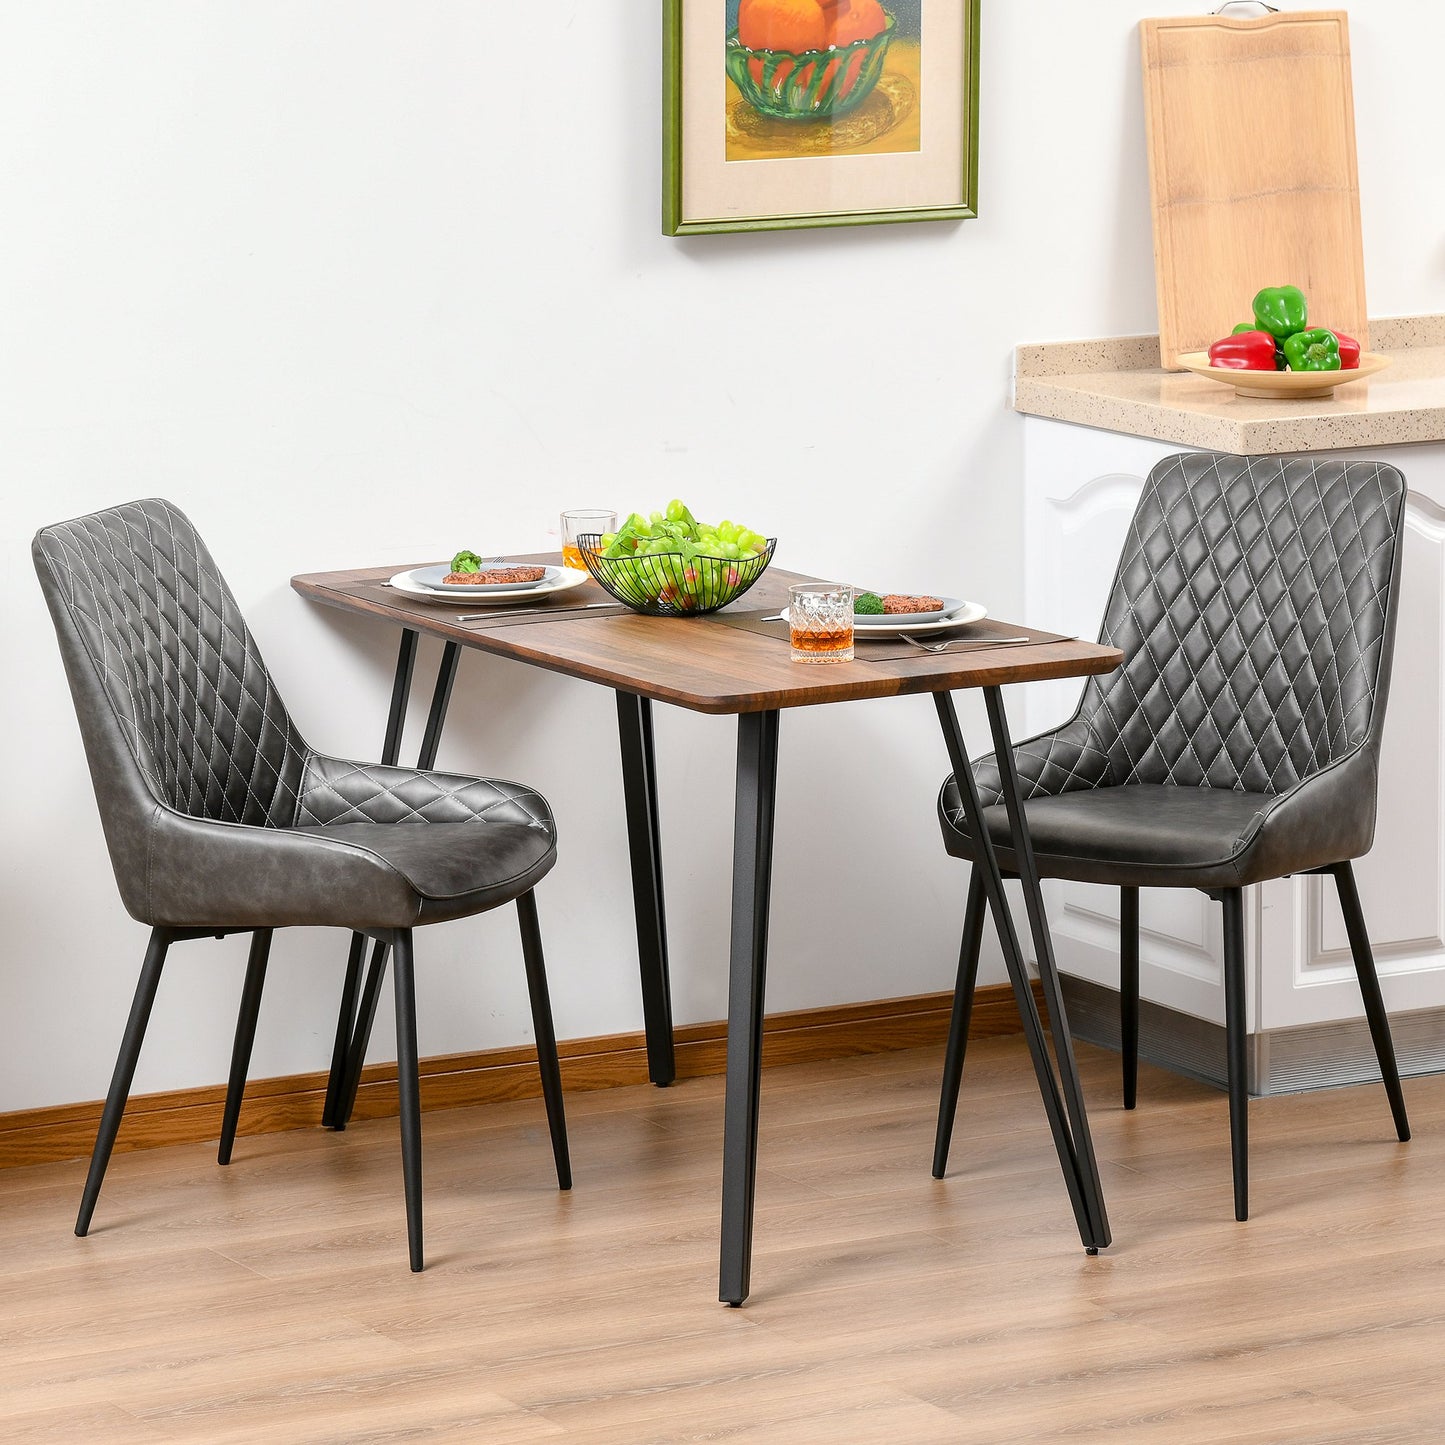 HOMCOM Retro Dining Chair Set of 2, PU Leather Upholstered Side Chairs with Metal Legs